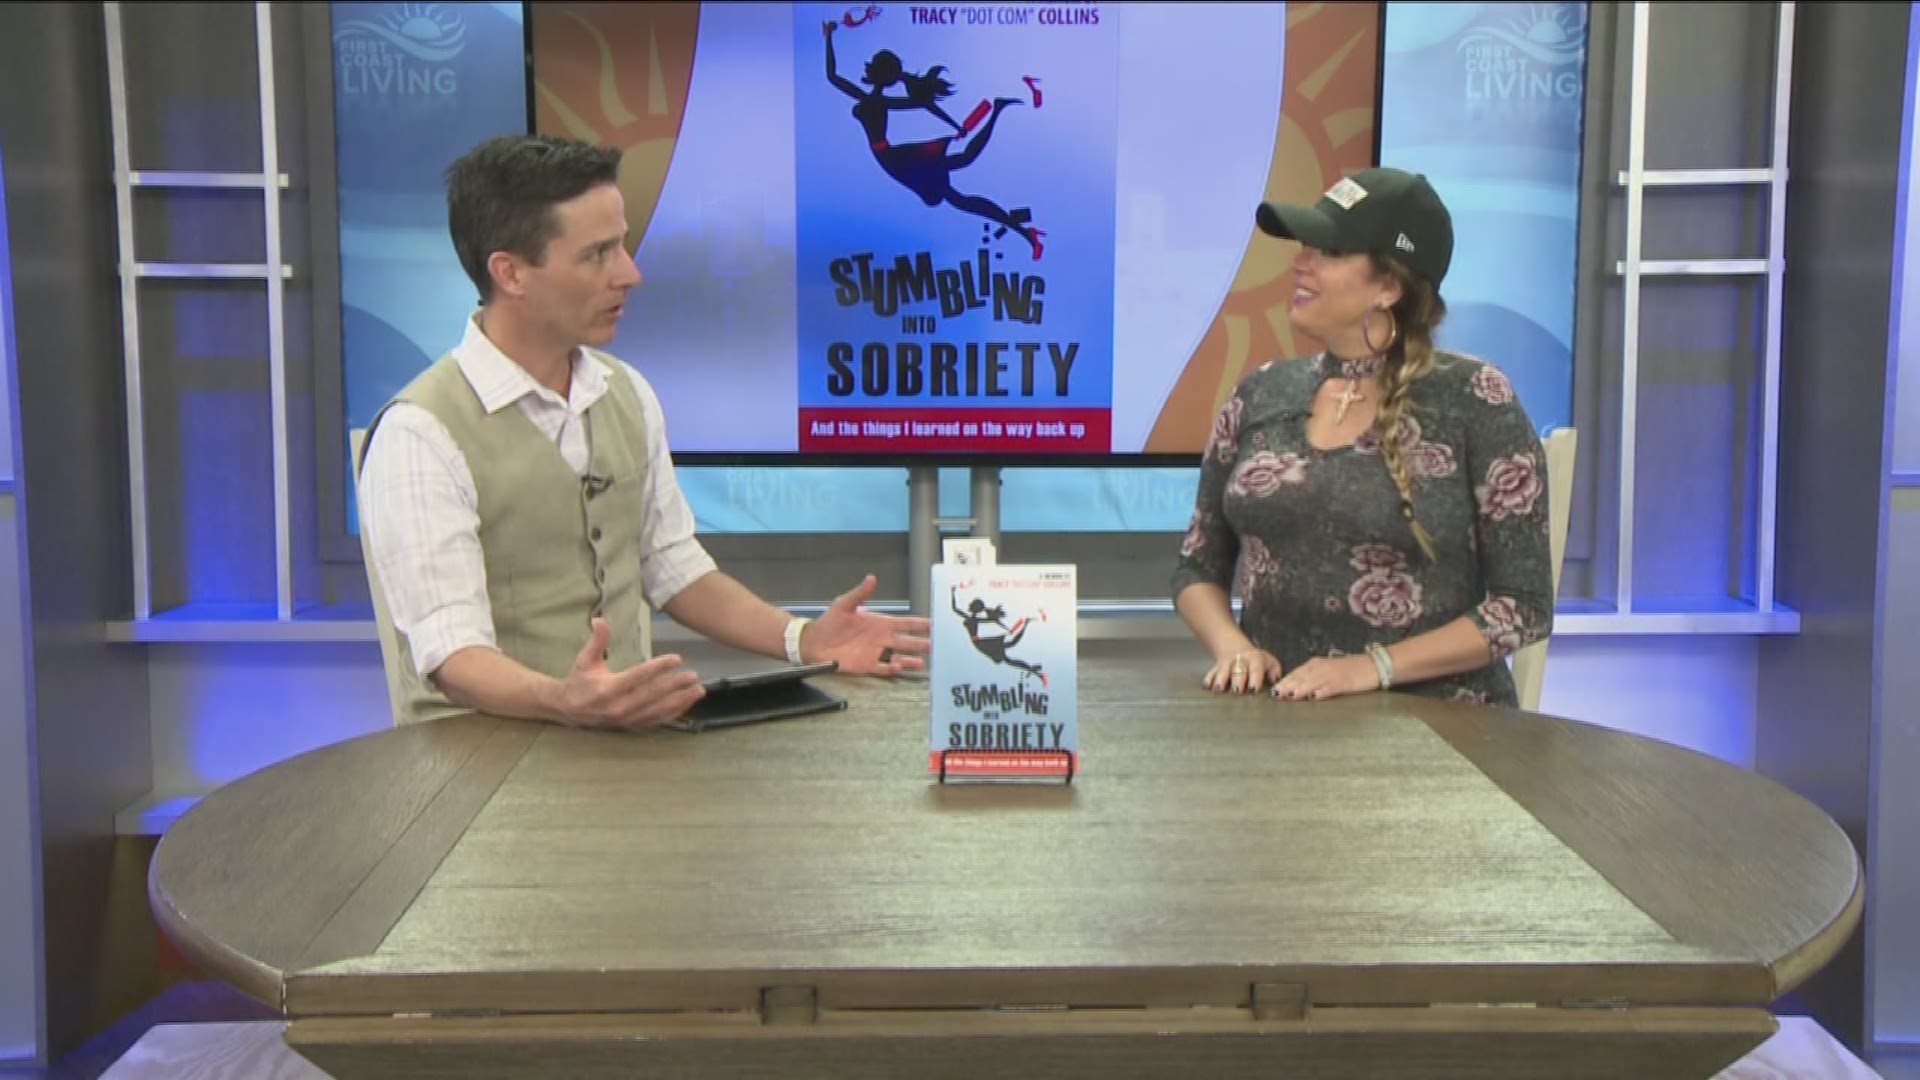 Tracy Collins wrote a book titled "Stumbling into Sobriety" to inspire others who are going through what she went through.